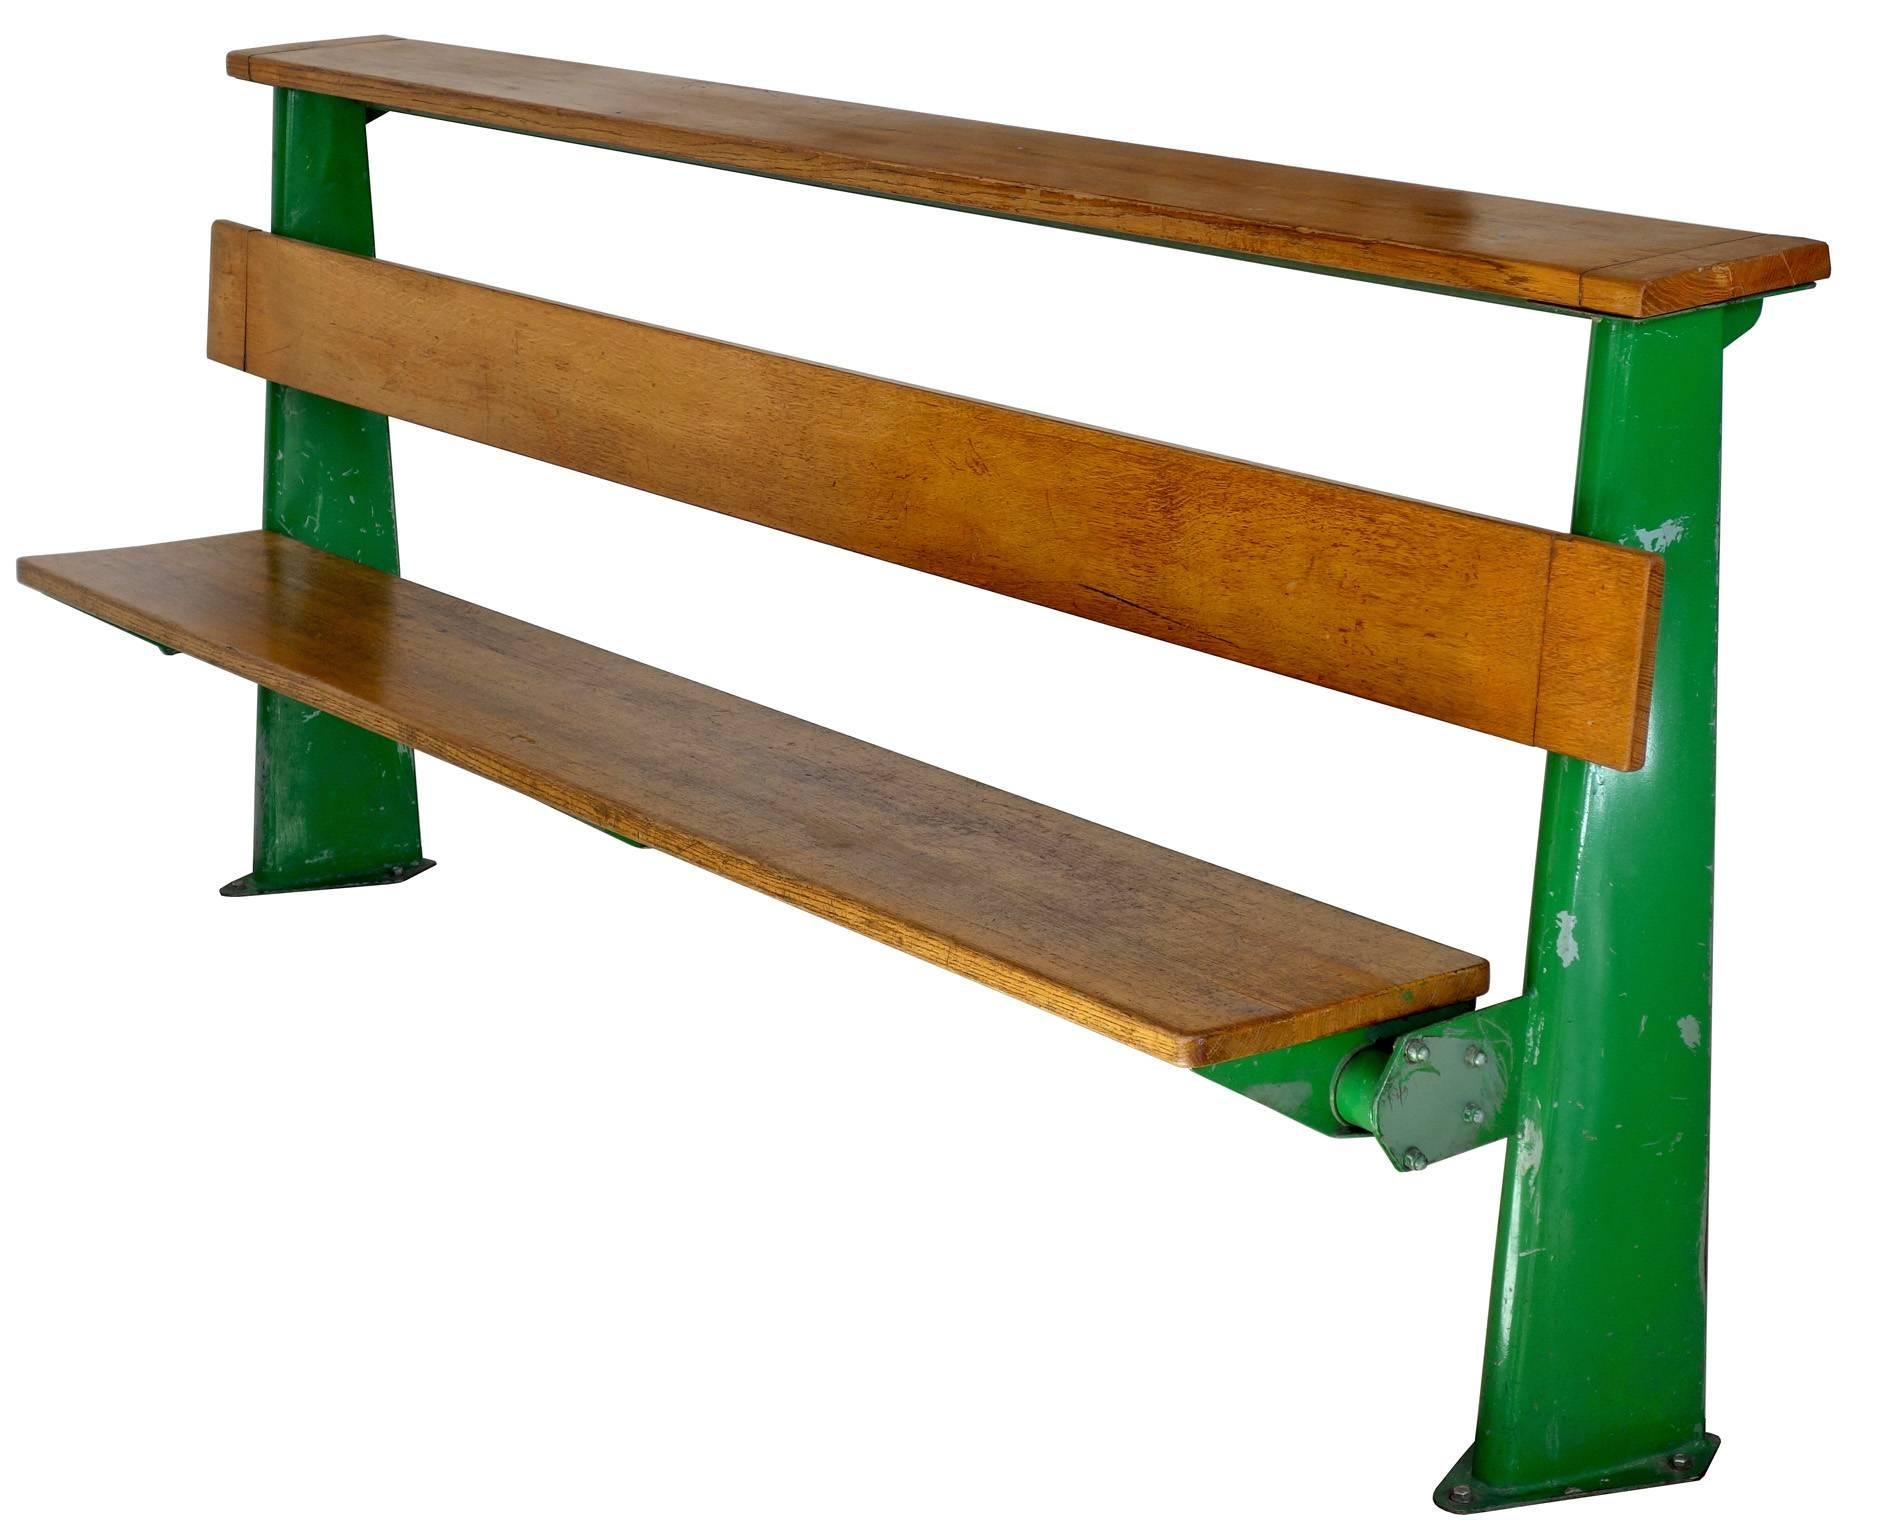 Steel Jean Prouve Bench